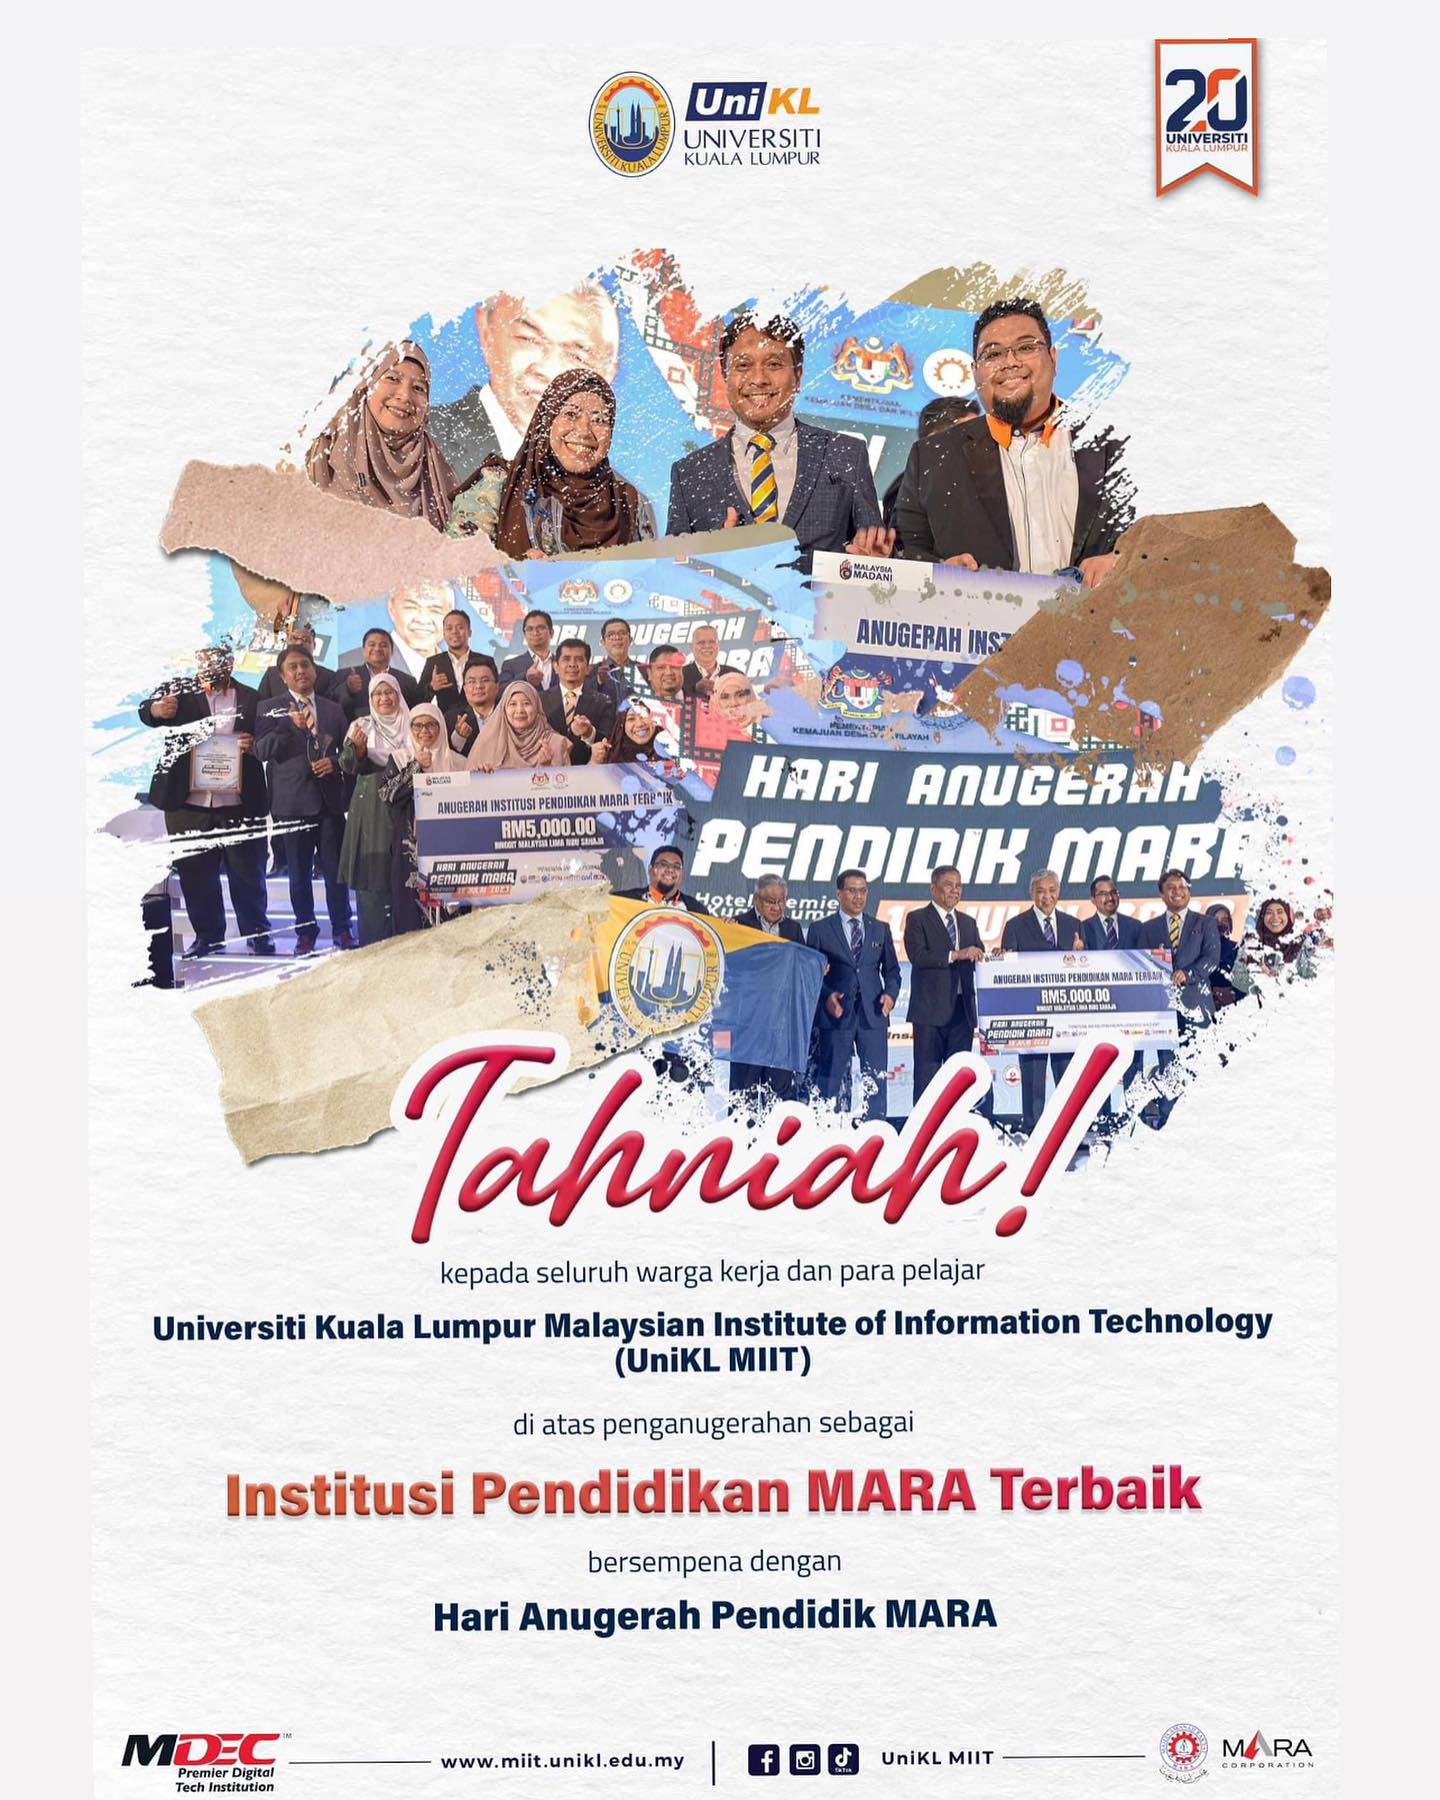 UniKL Malaysian Institute of Information Technology (UniKL MIIT) for being crowned as the Best MARA Educational Institution